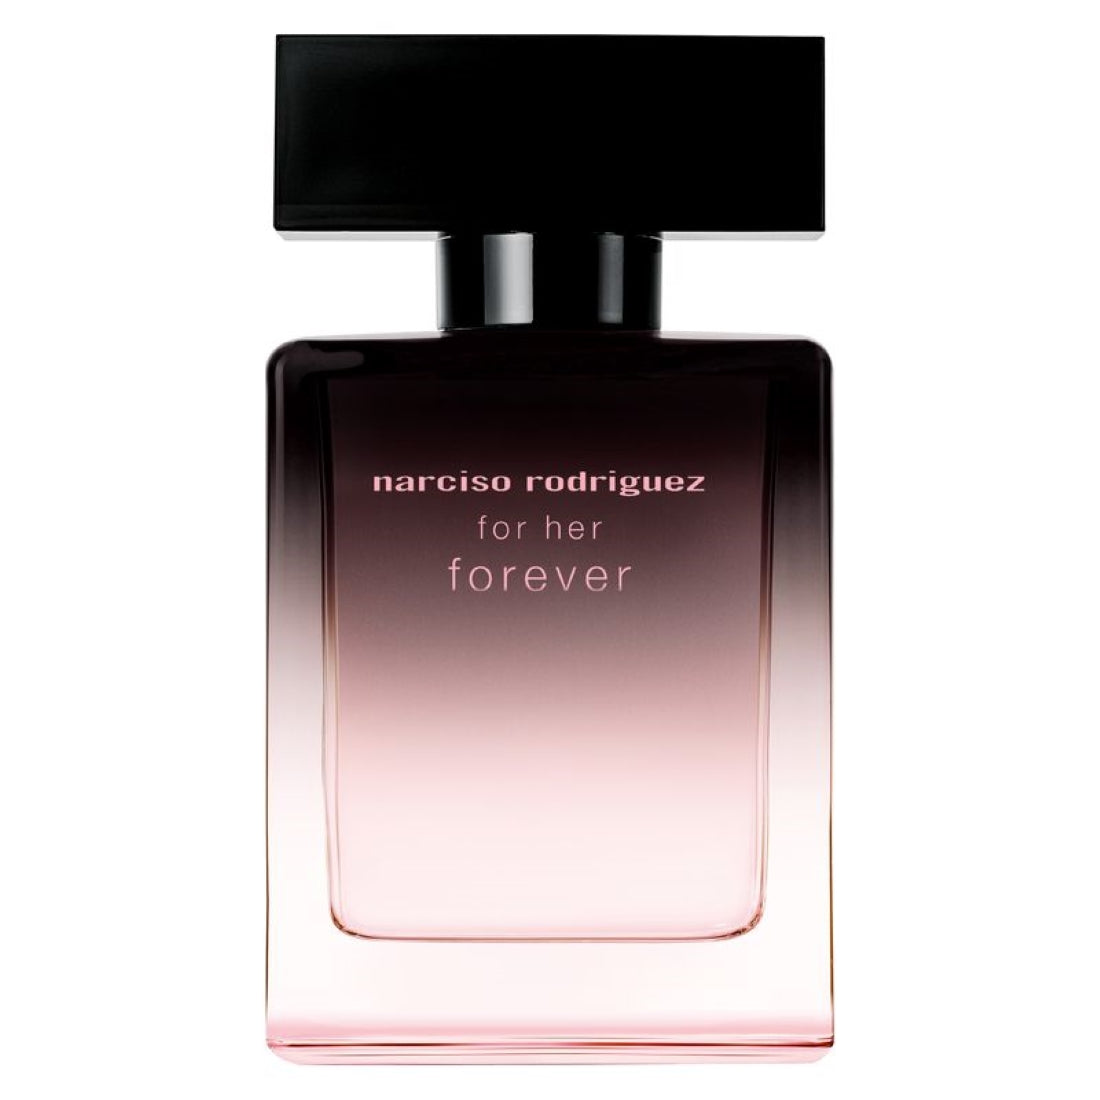 NARCISO RODRIGUEZ FOR HER FOREVER